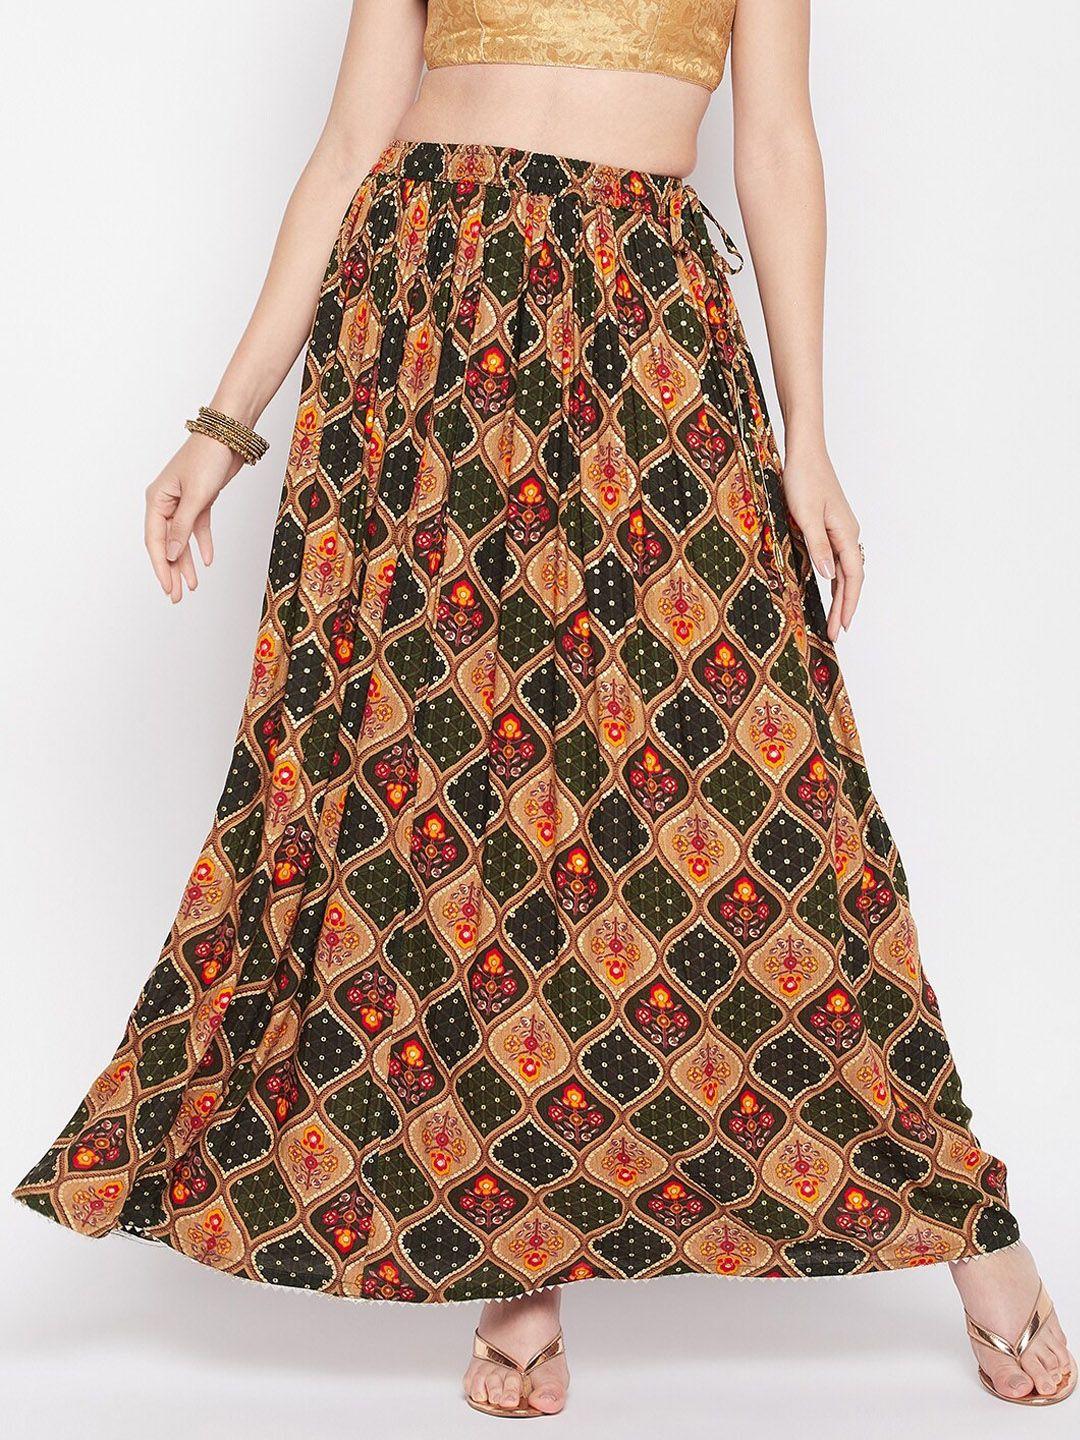 clora creation floral printed flared maxi skirt